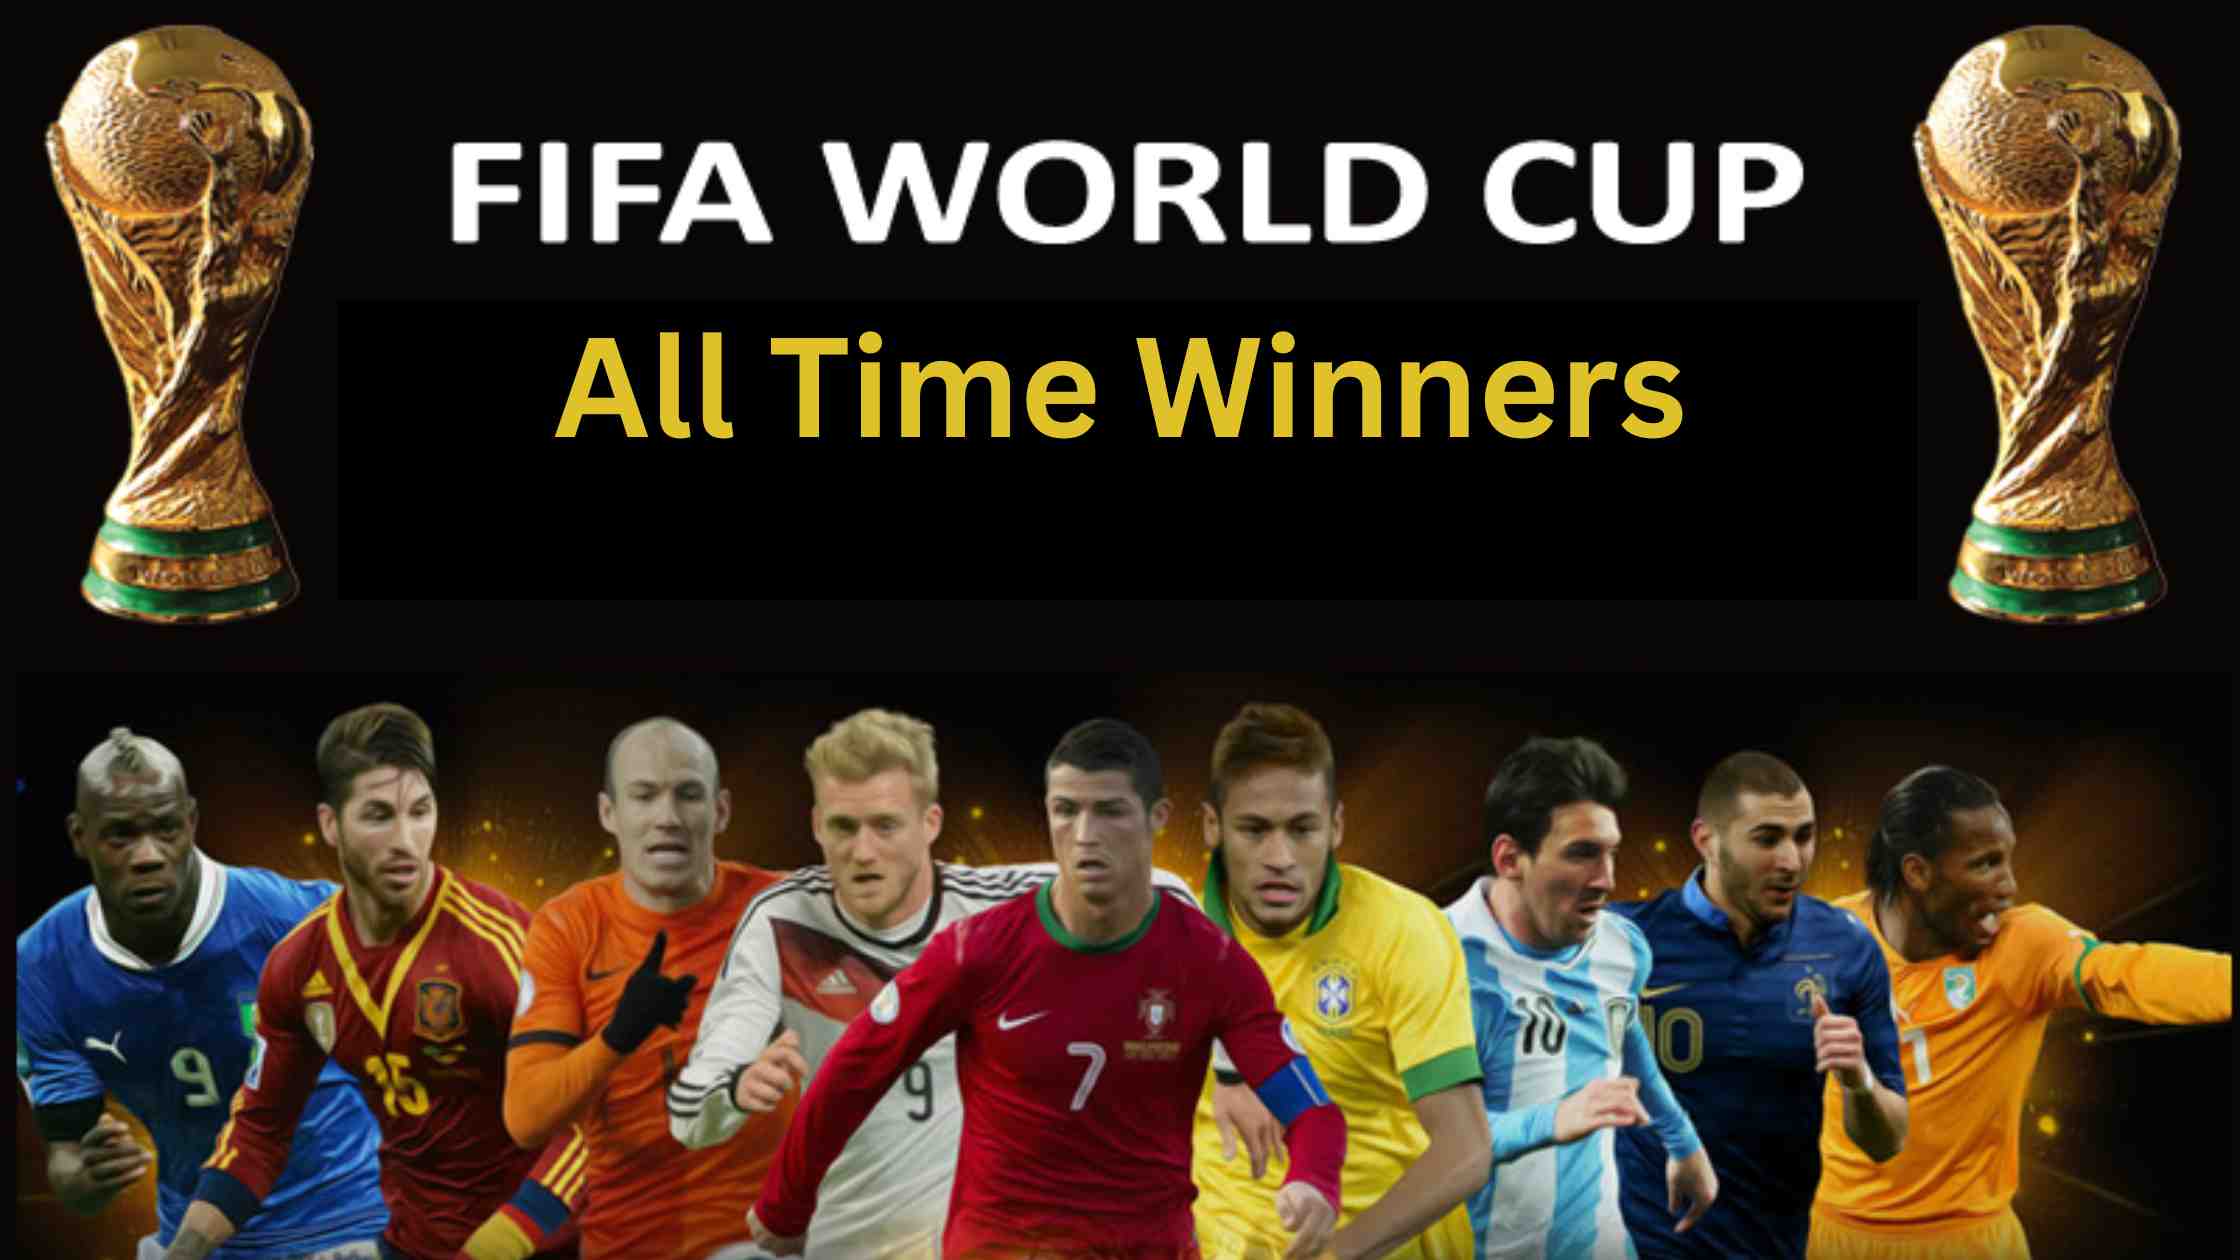 FIFA World Cup All Time Winners